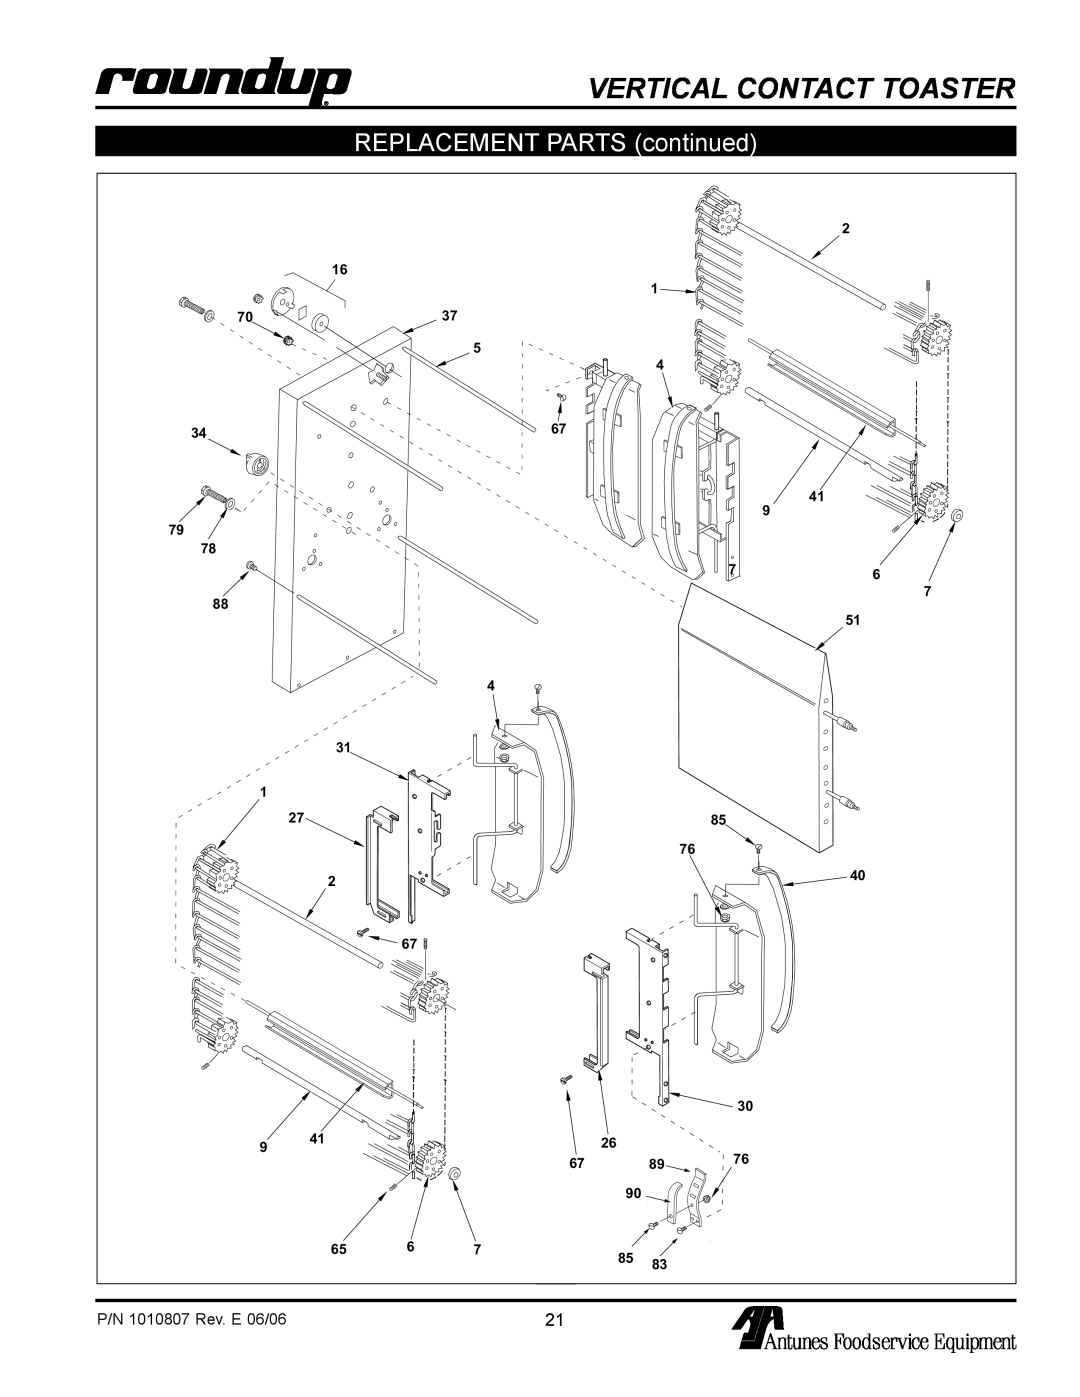 Antunes, AJ VCT-1000 owner manual Vertical Contact Toaster, REPLACEMENT PARTS continued, P/N 1010807 Rev. E 06/06 